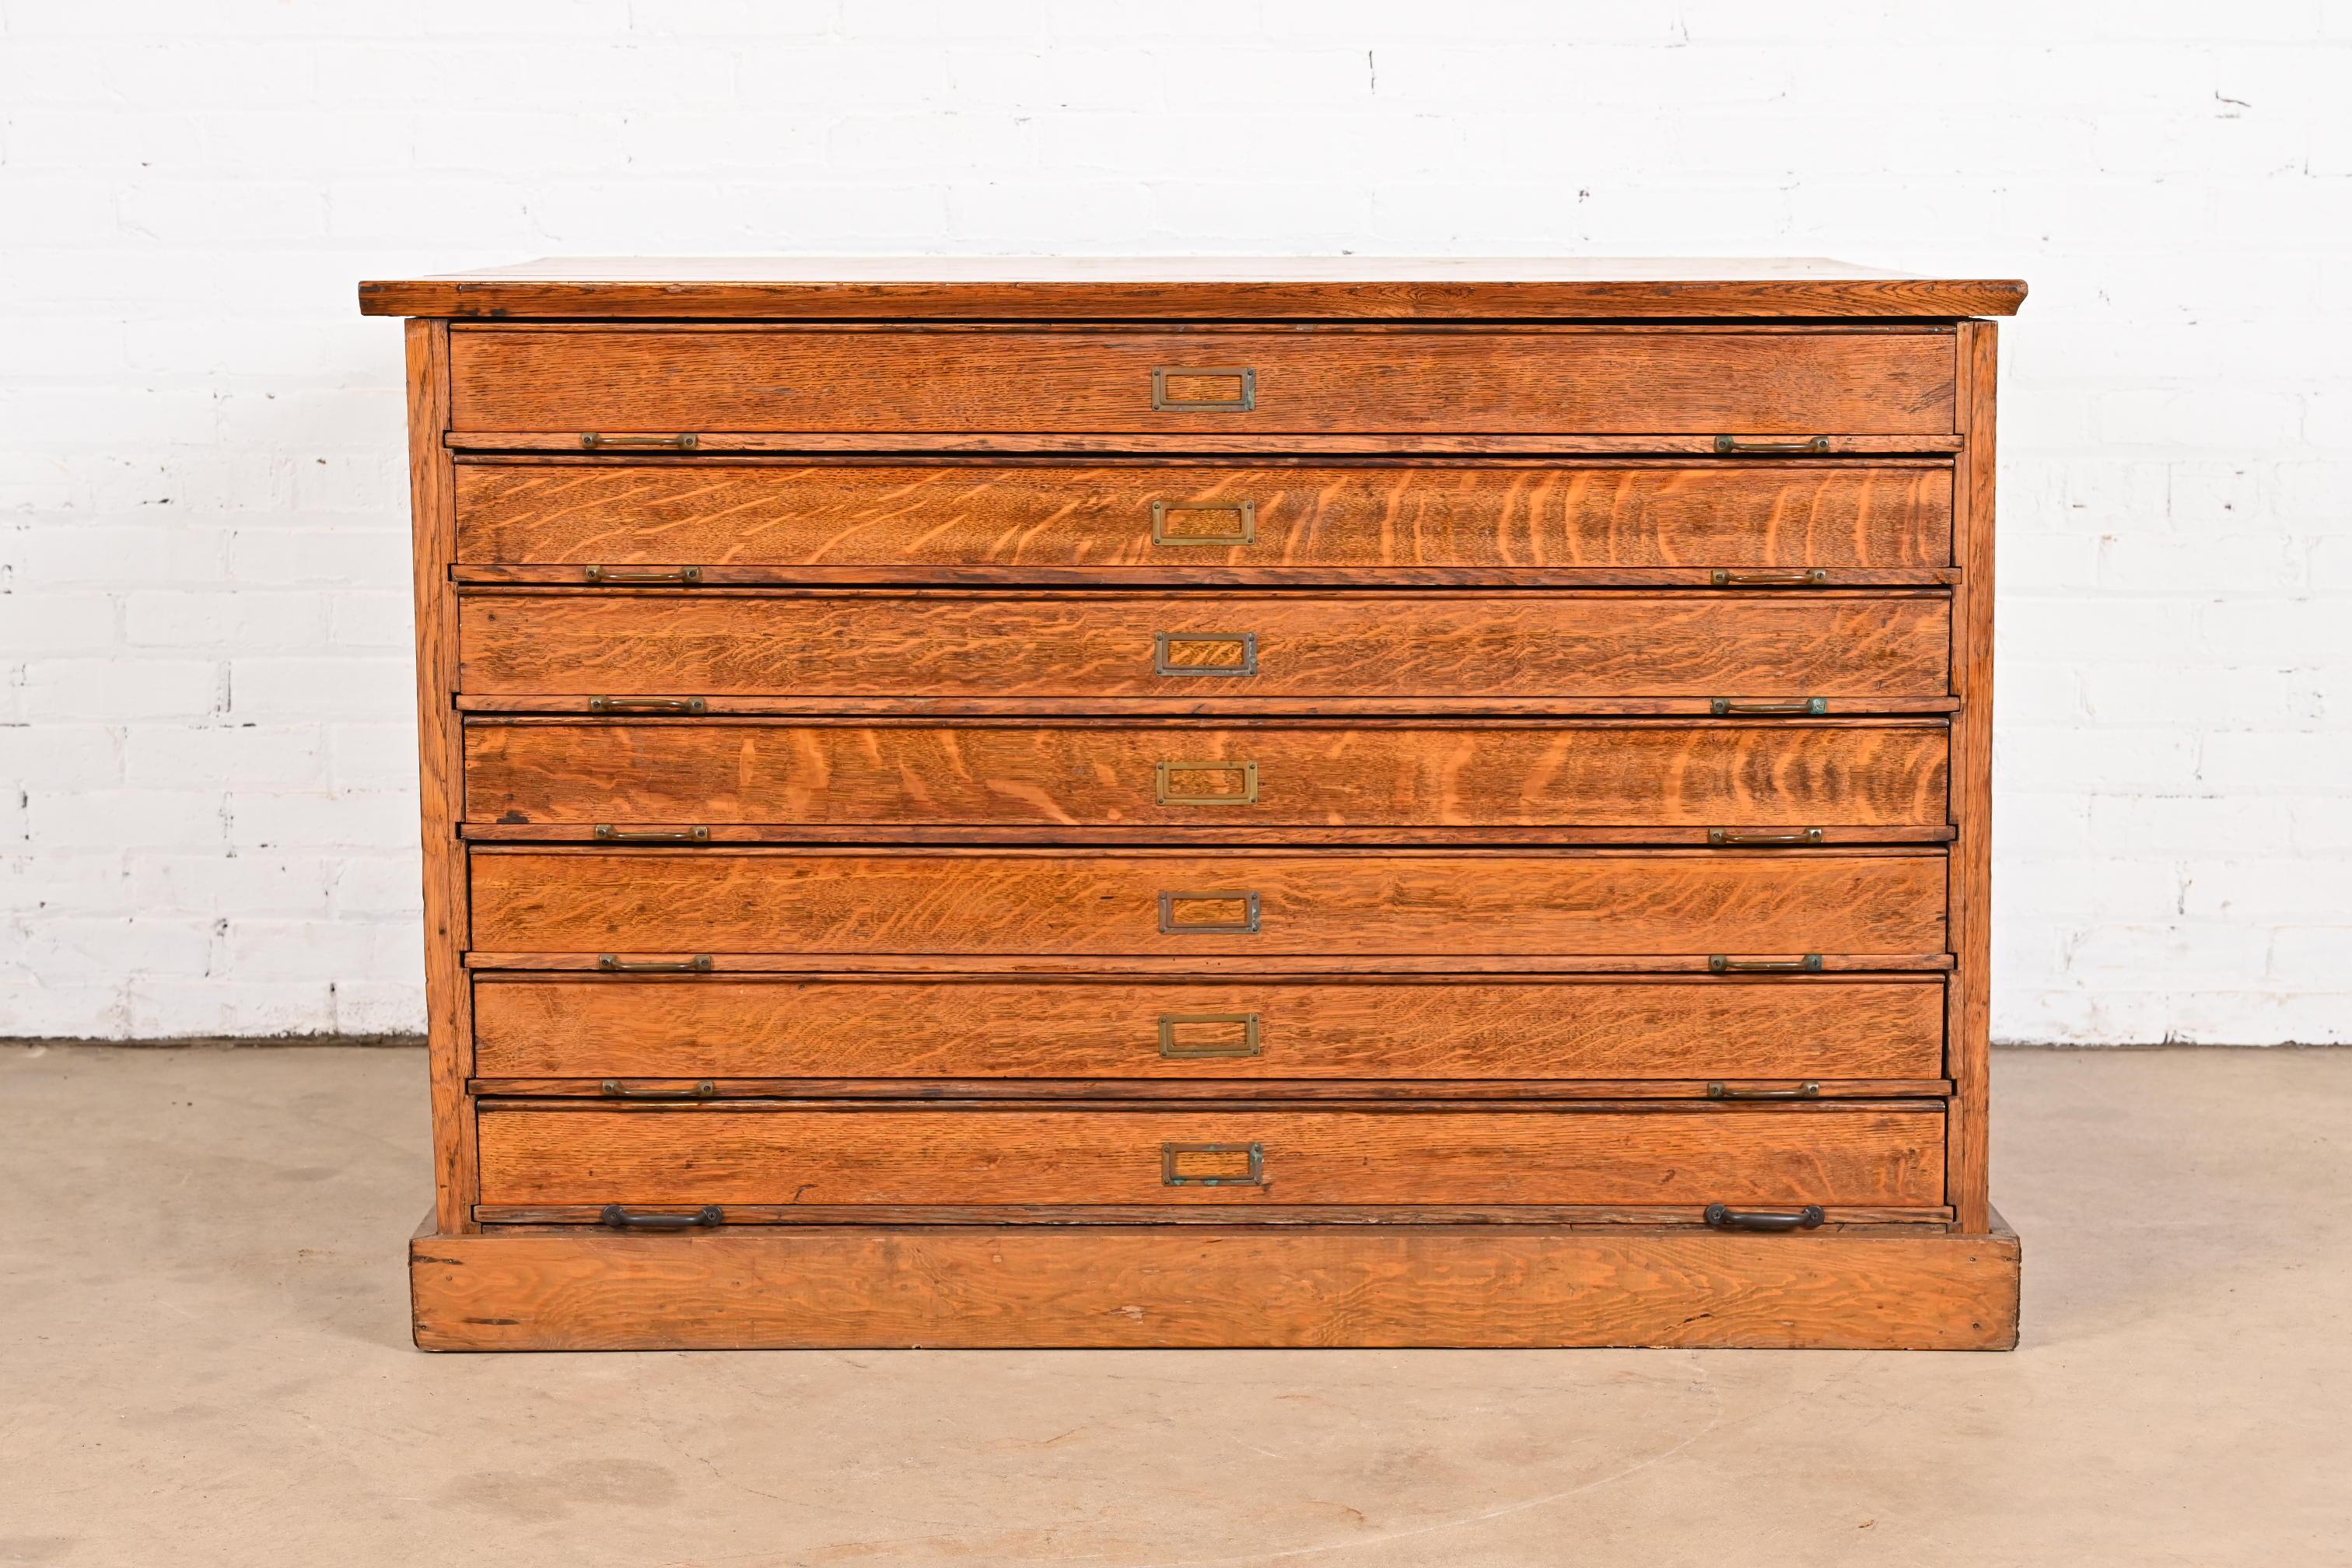 A rare and exceptional antique Arts & Crafts architect's blueprint or map flat file cabinet

USA, Circa 1900

Solid quarter sawn oak, with brass hardware.

Measures: 49